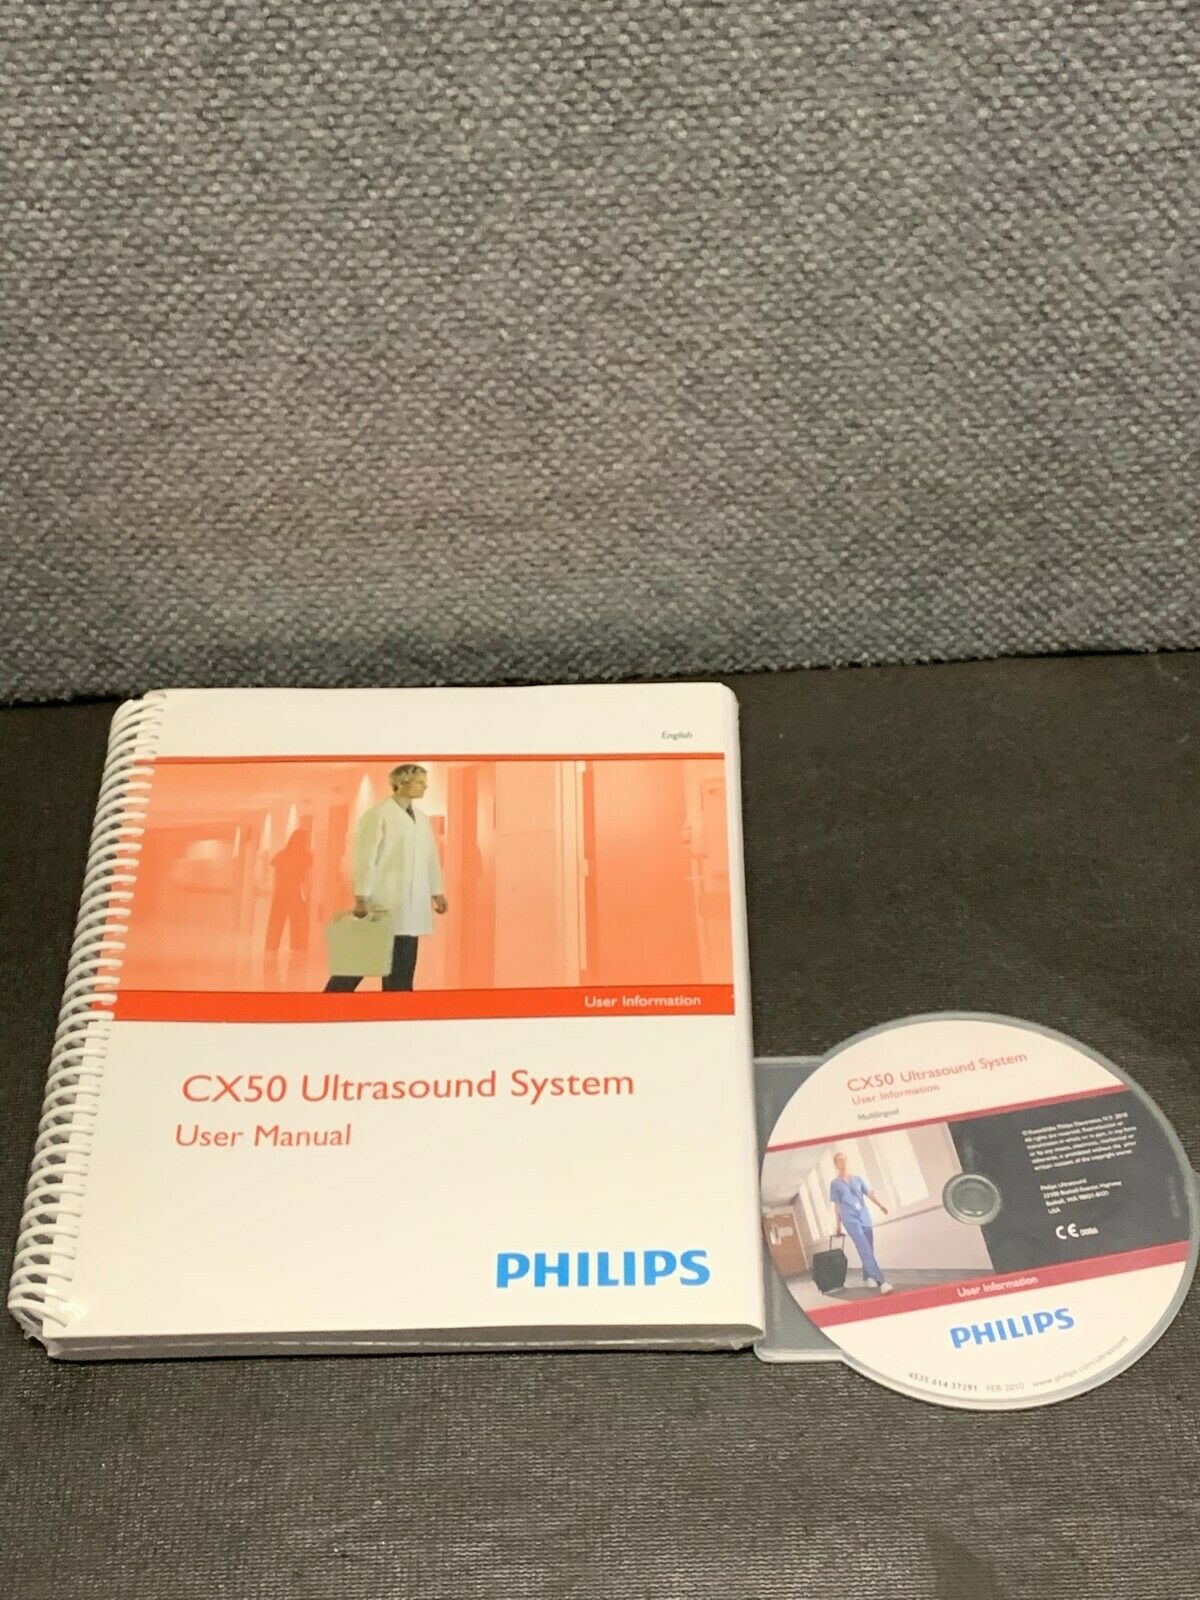 PHILIPS CX50 ULTRASOUND SYSTEM USER & INFORMATION MANUAL BOOK & CD DIAGNOSTIC ULTRASOUND MACHINES FOR SALE